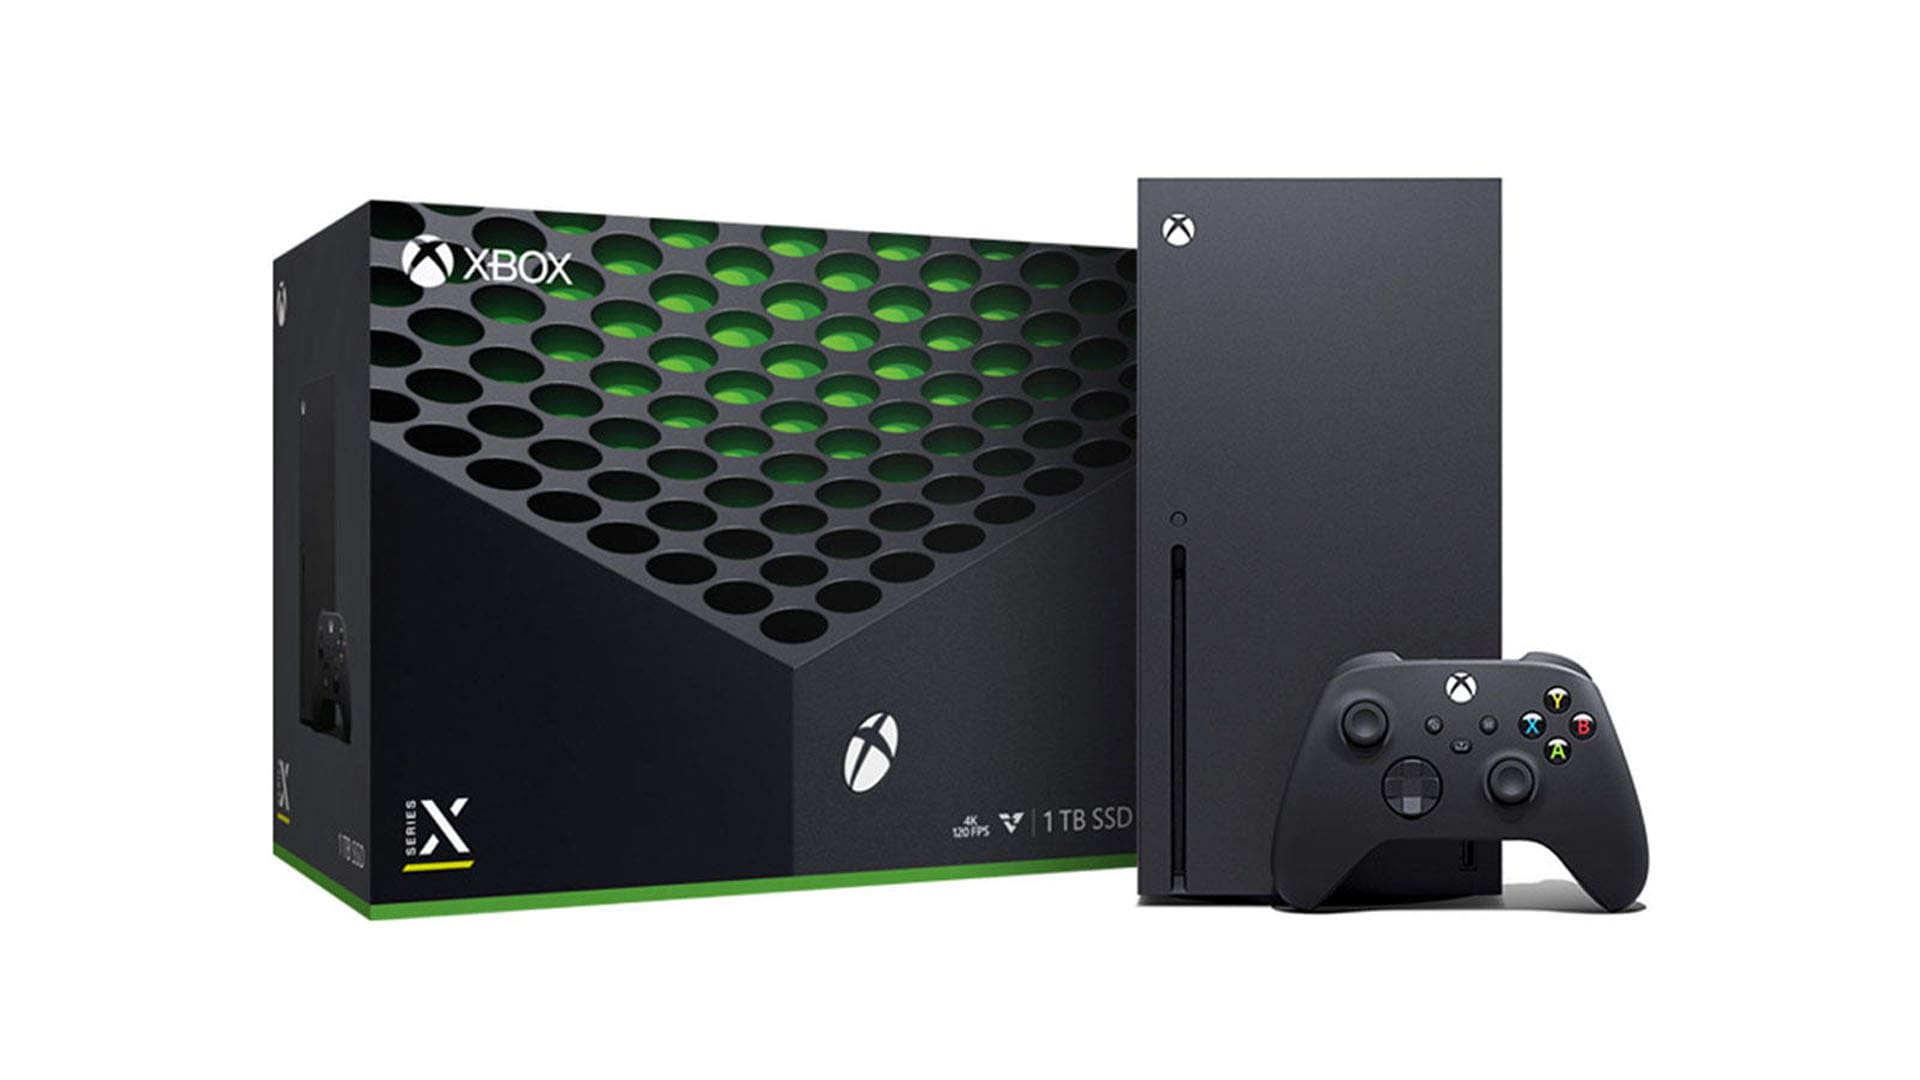 Xbox Series X Console Showcasing Its Powerful Performance and Sleek Design